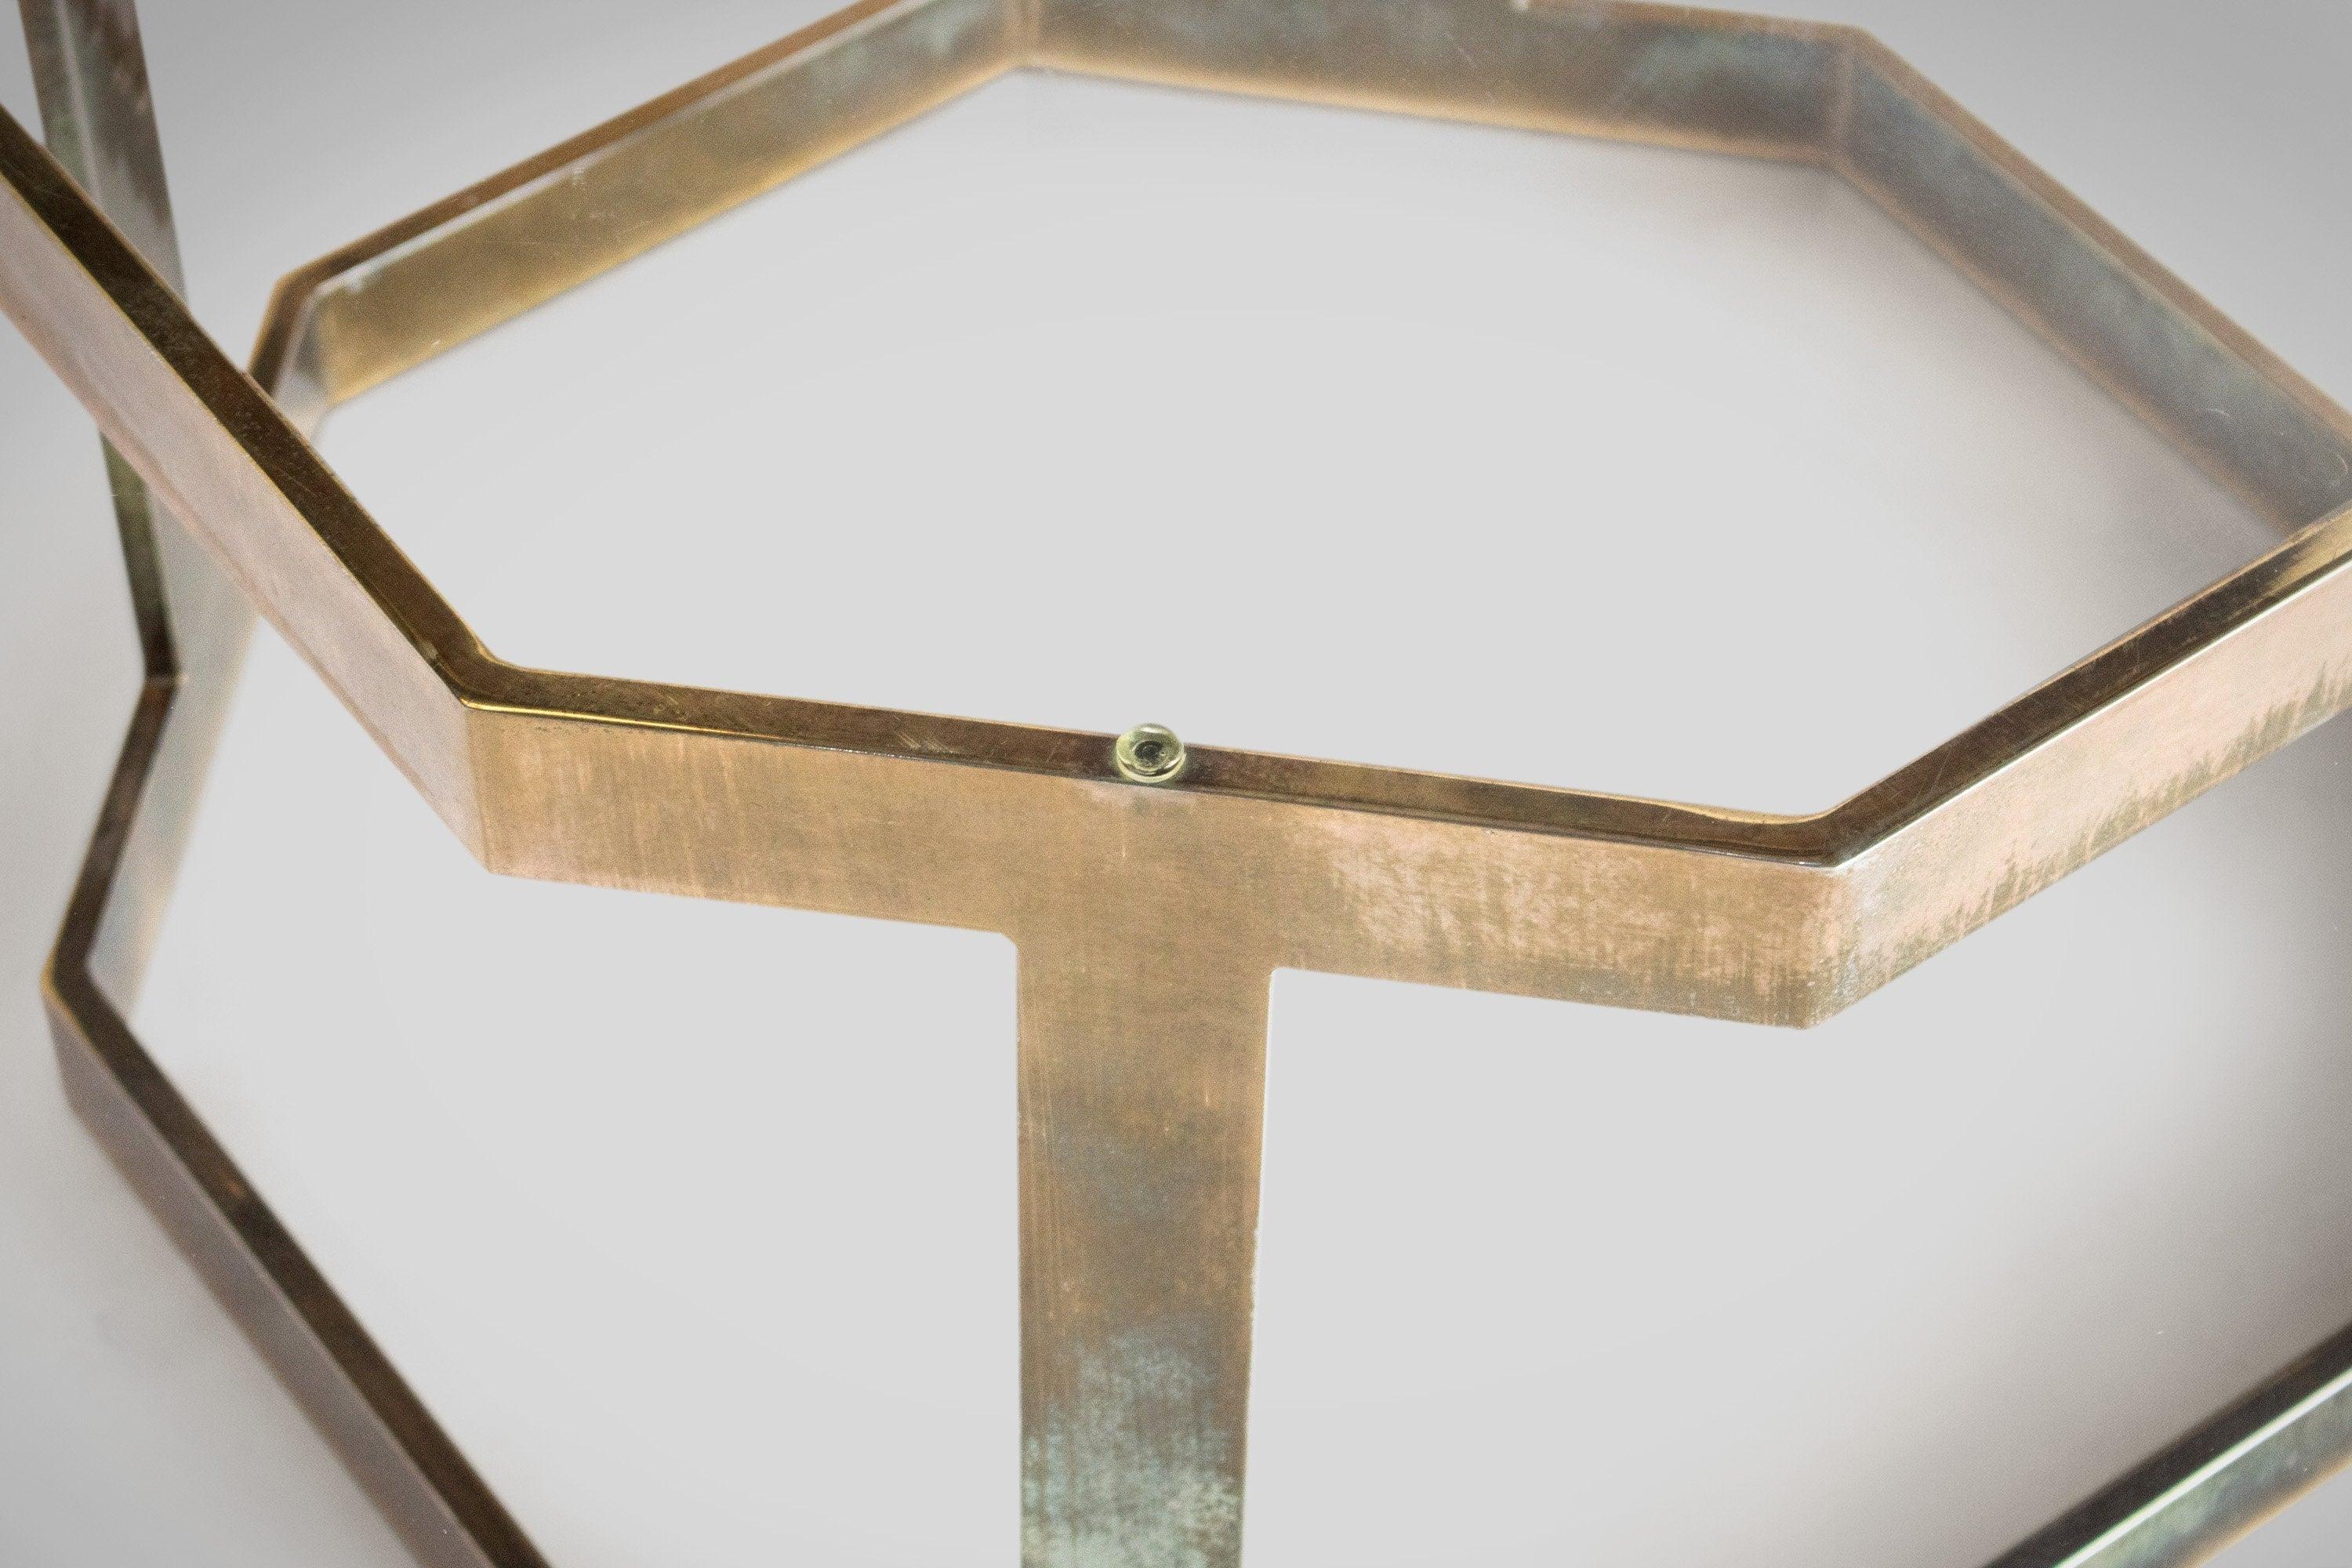 American Patinaed Brass Octagonal Coffee / Cocktail Table After Milo Baughman, c. 1970s For Sale